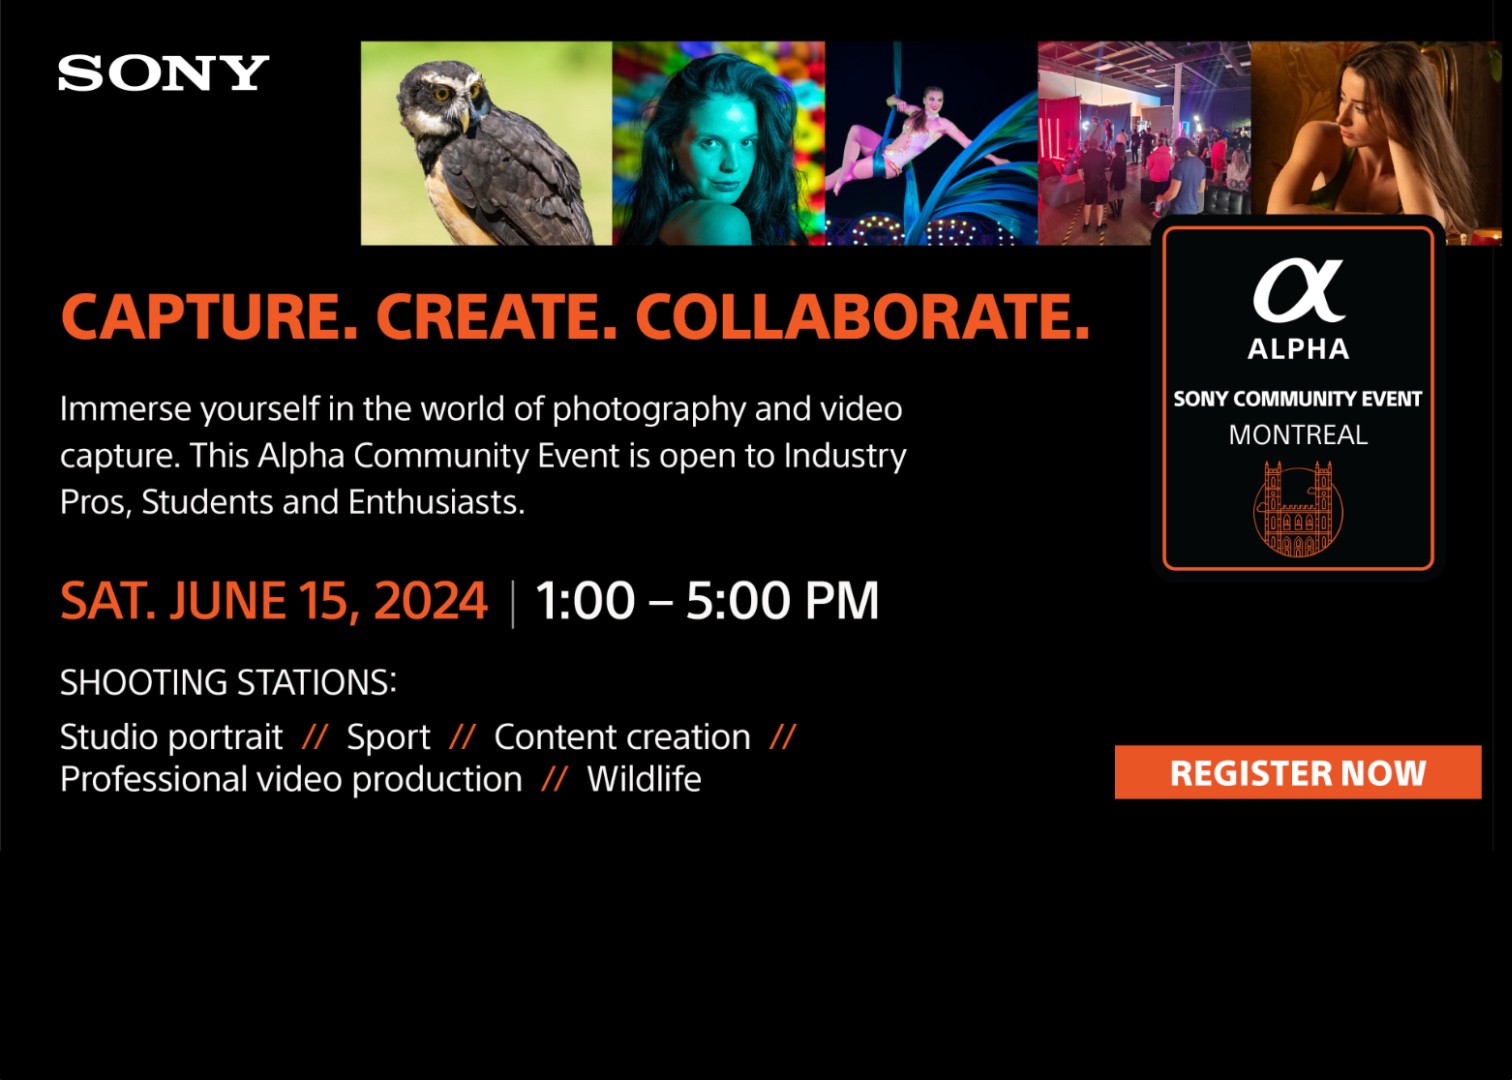 Big Sony event on June 15, 2024. The Camtec Team will attend :)